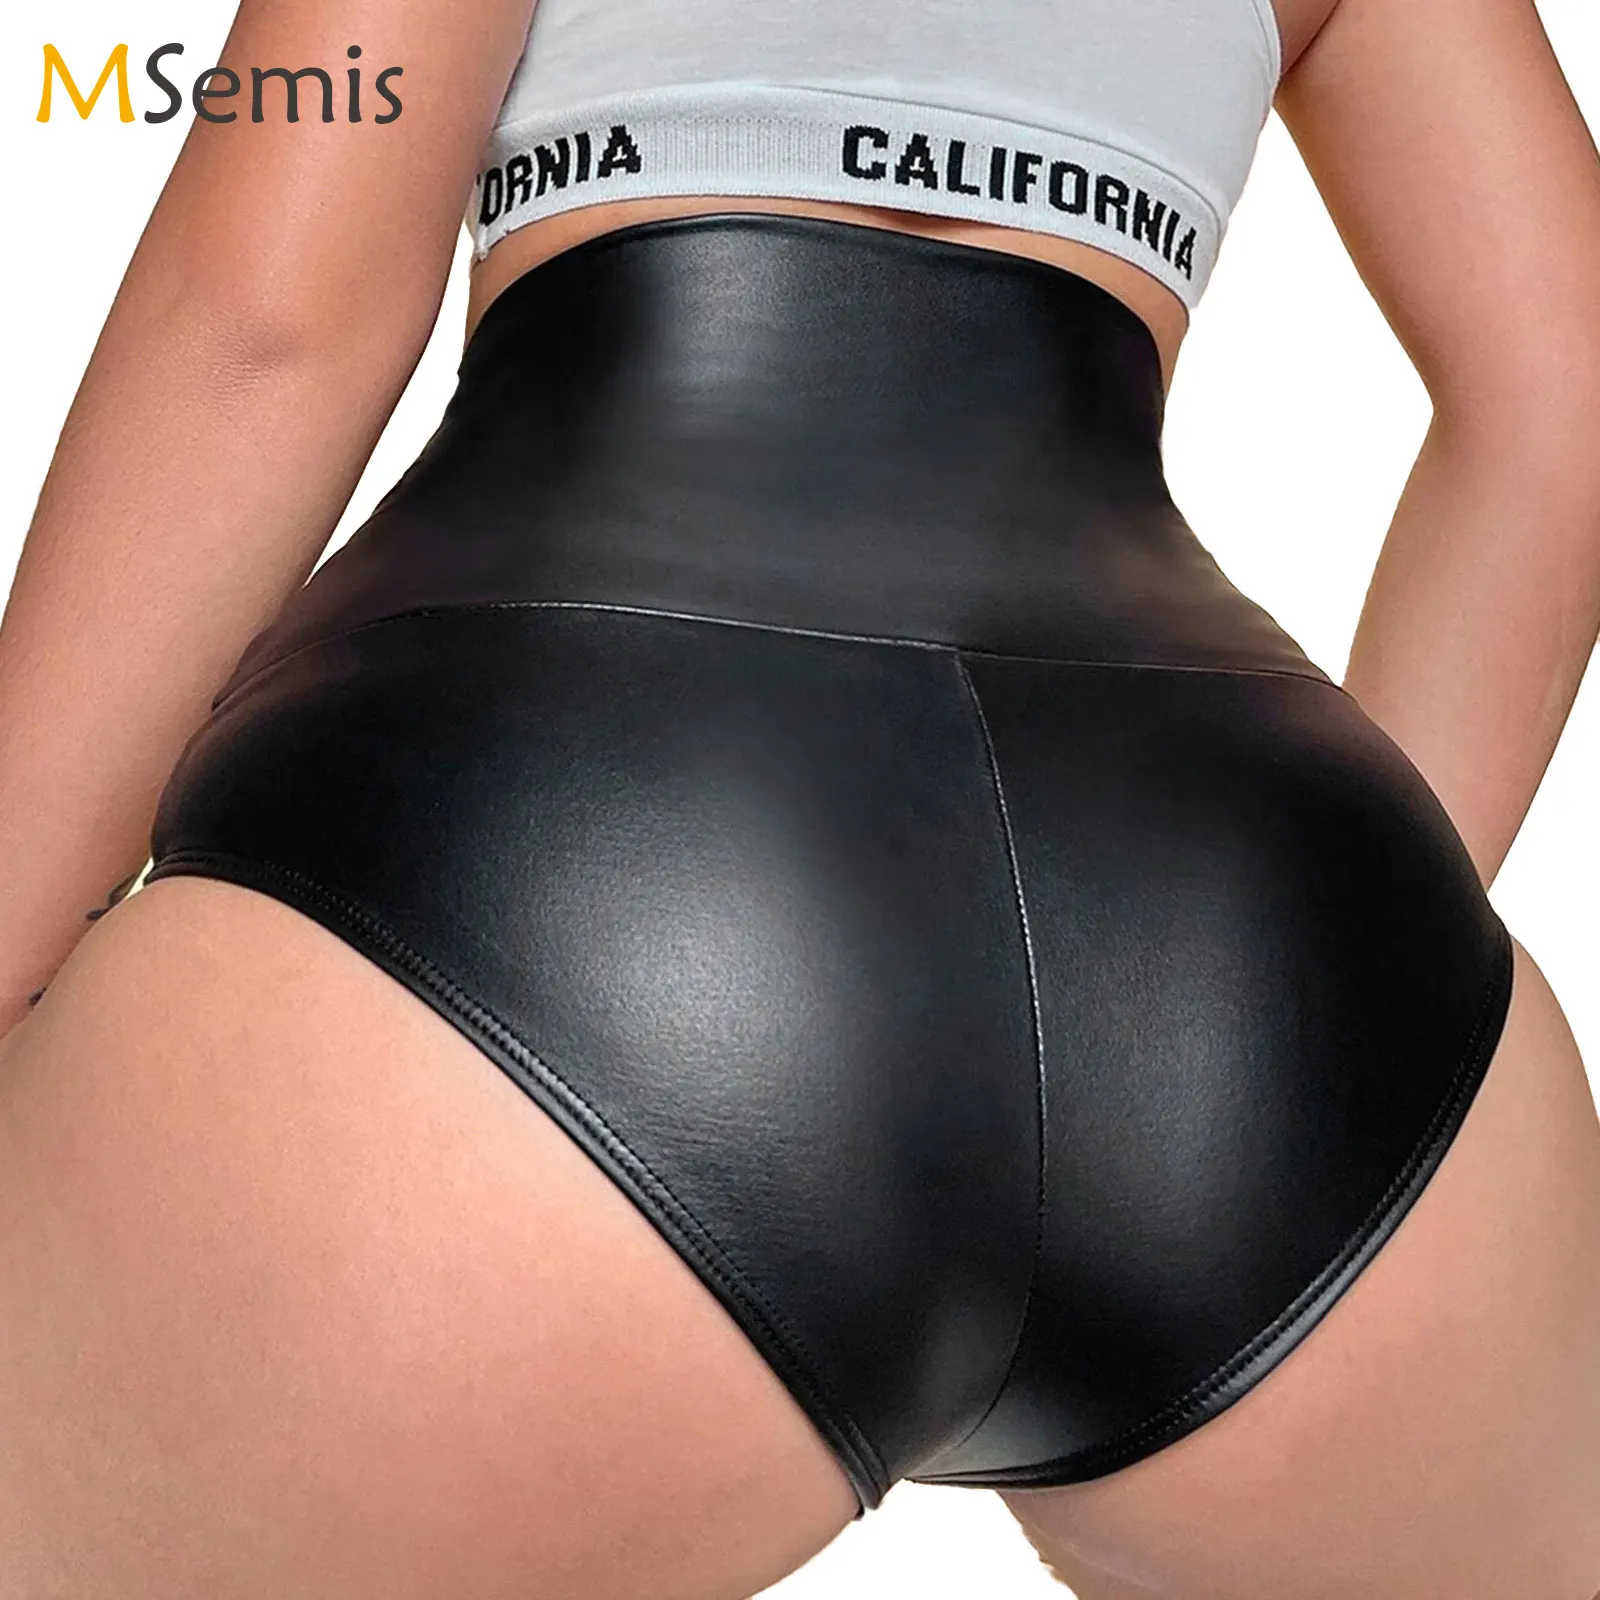 

Womens Pole Dancing Buttoms Metallic PU Leather Booty Shorts Disco Party Nightclub Rave Music Festival High Waisted Hot Pants